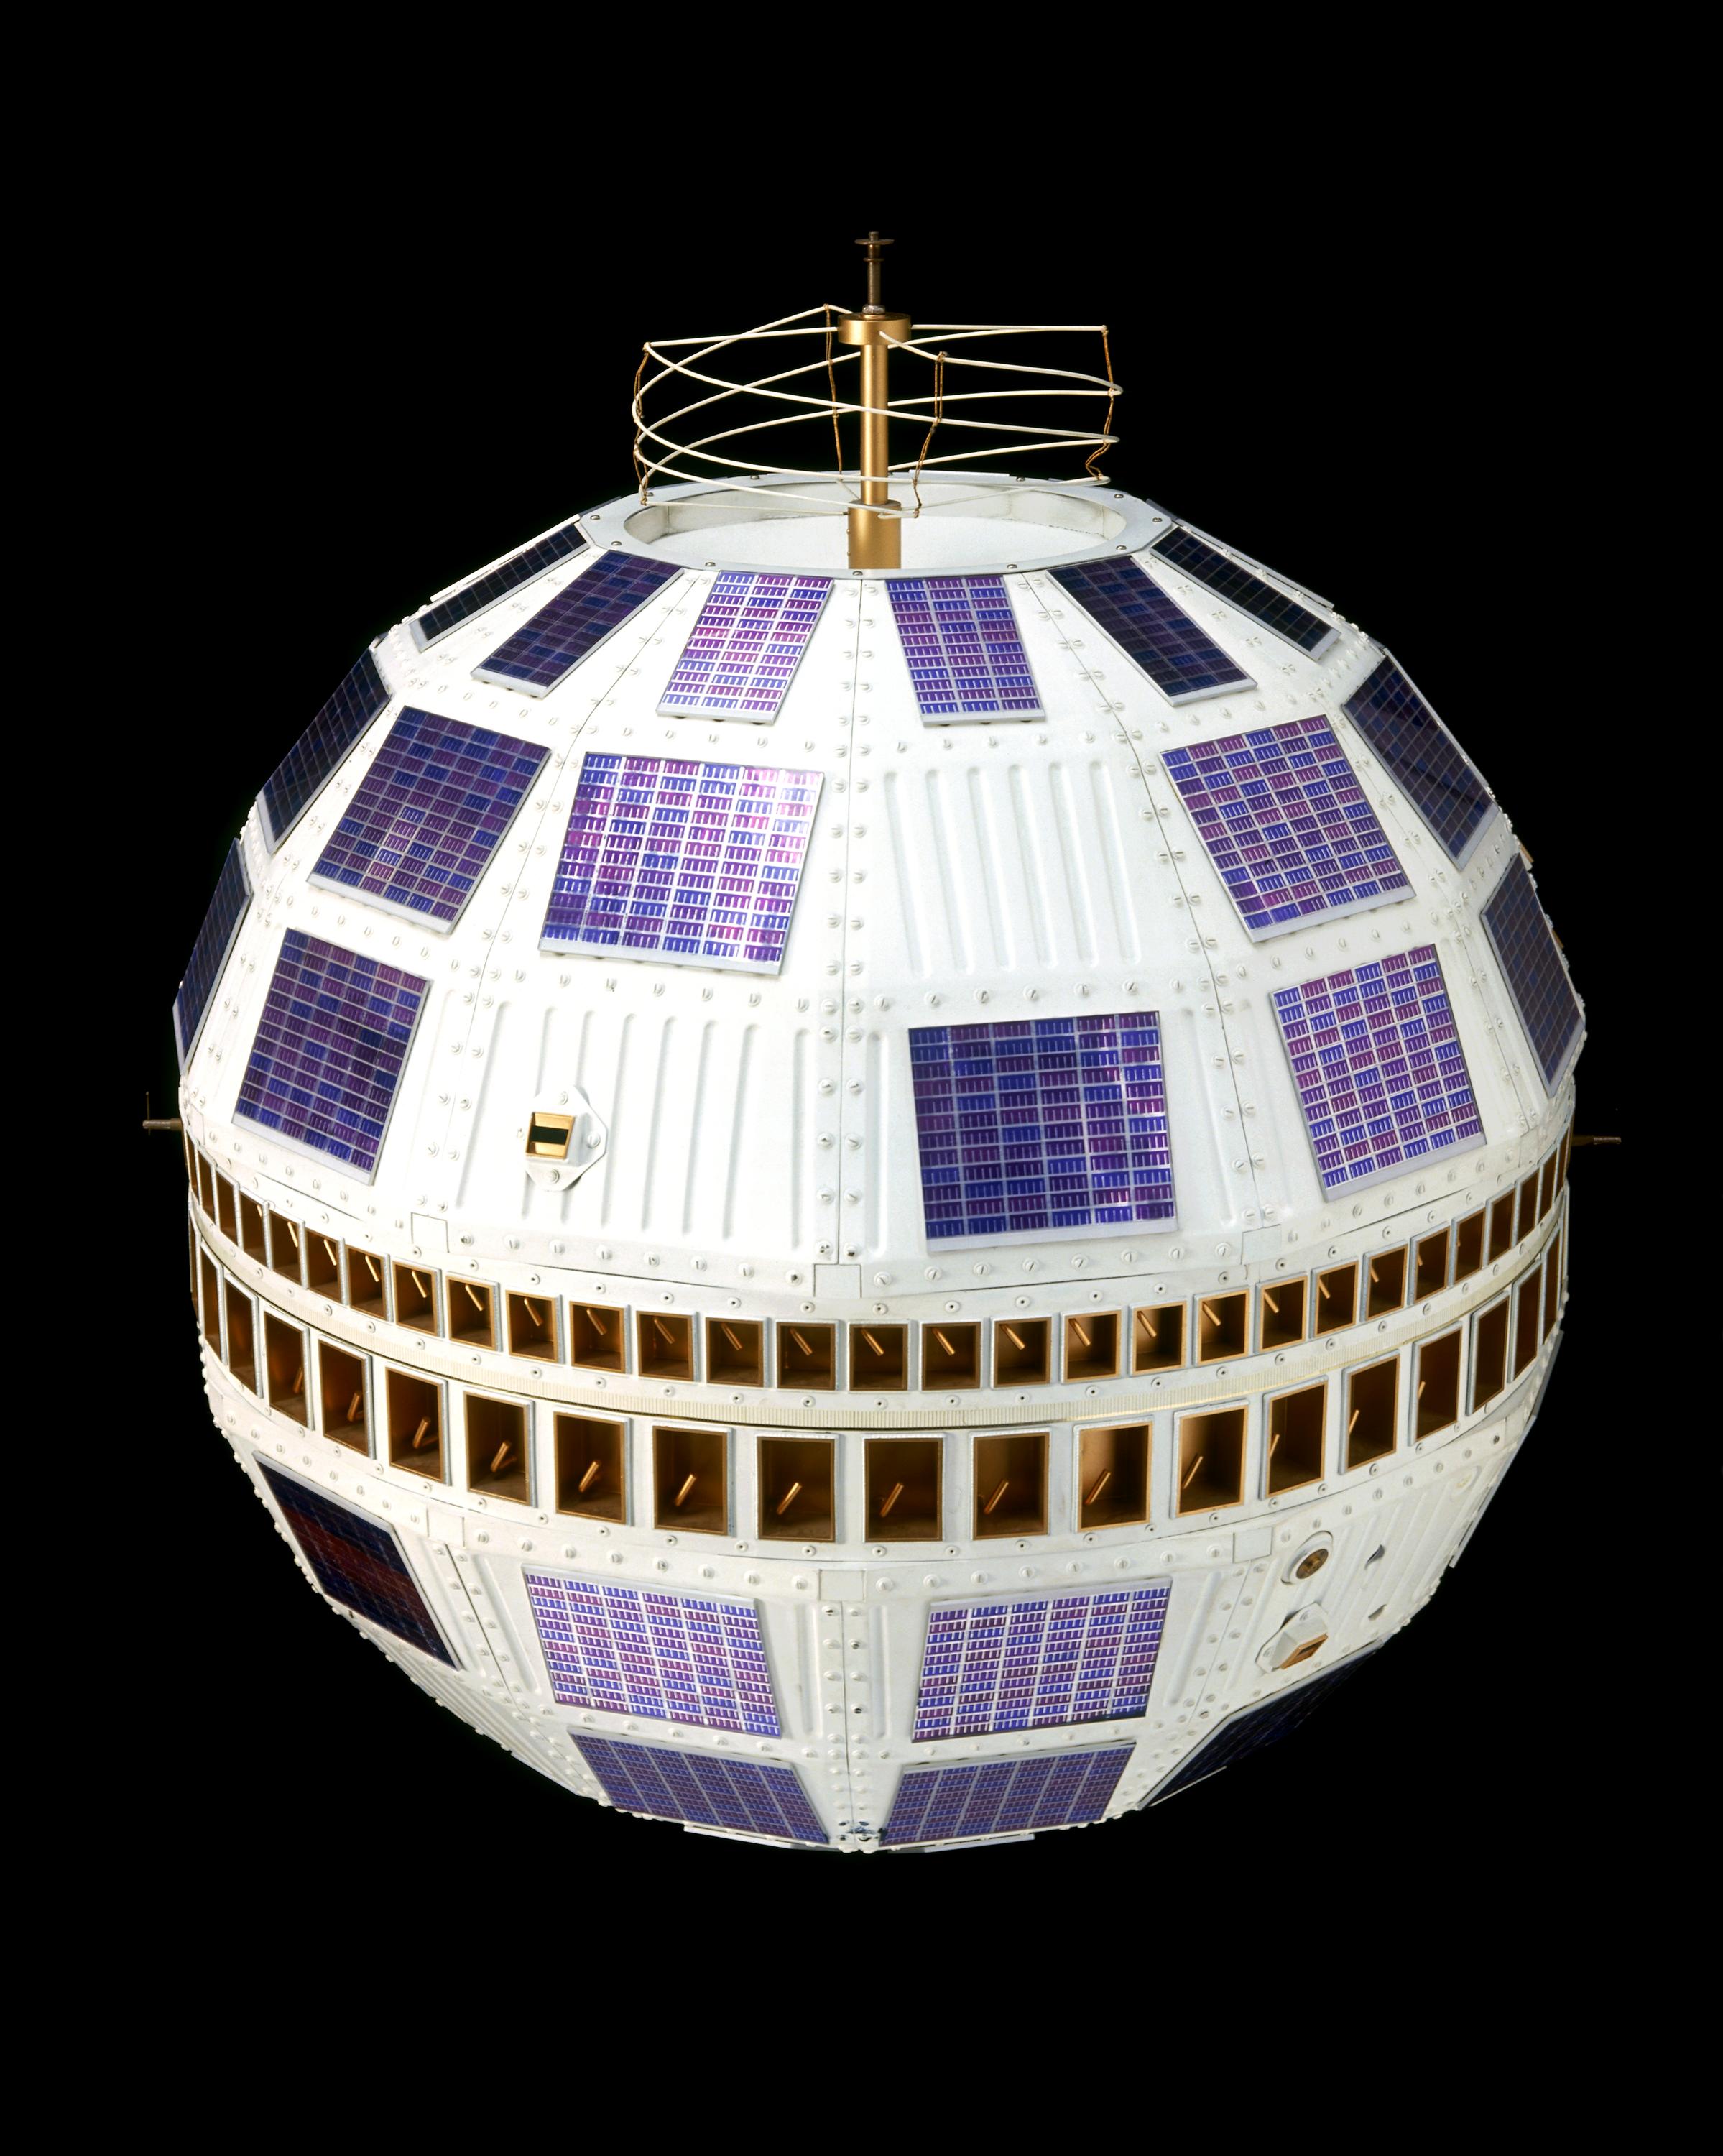 Telstar 1 communications satellite, 1962 (replica). Made by Bell Systems.